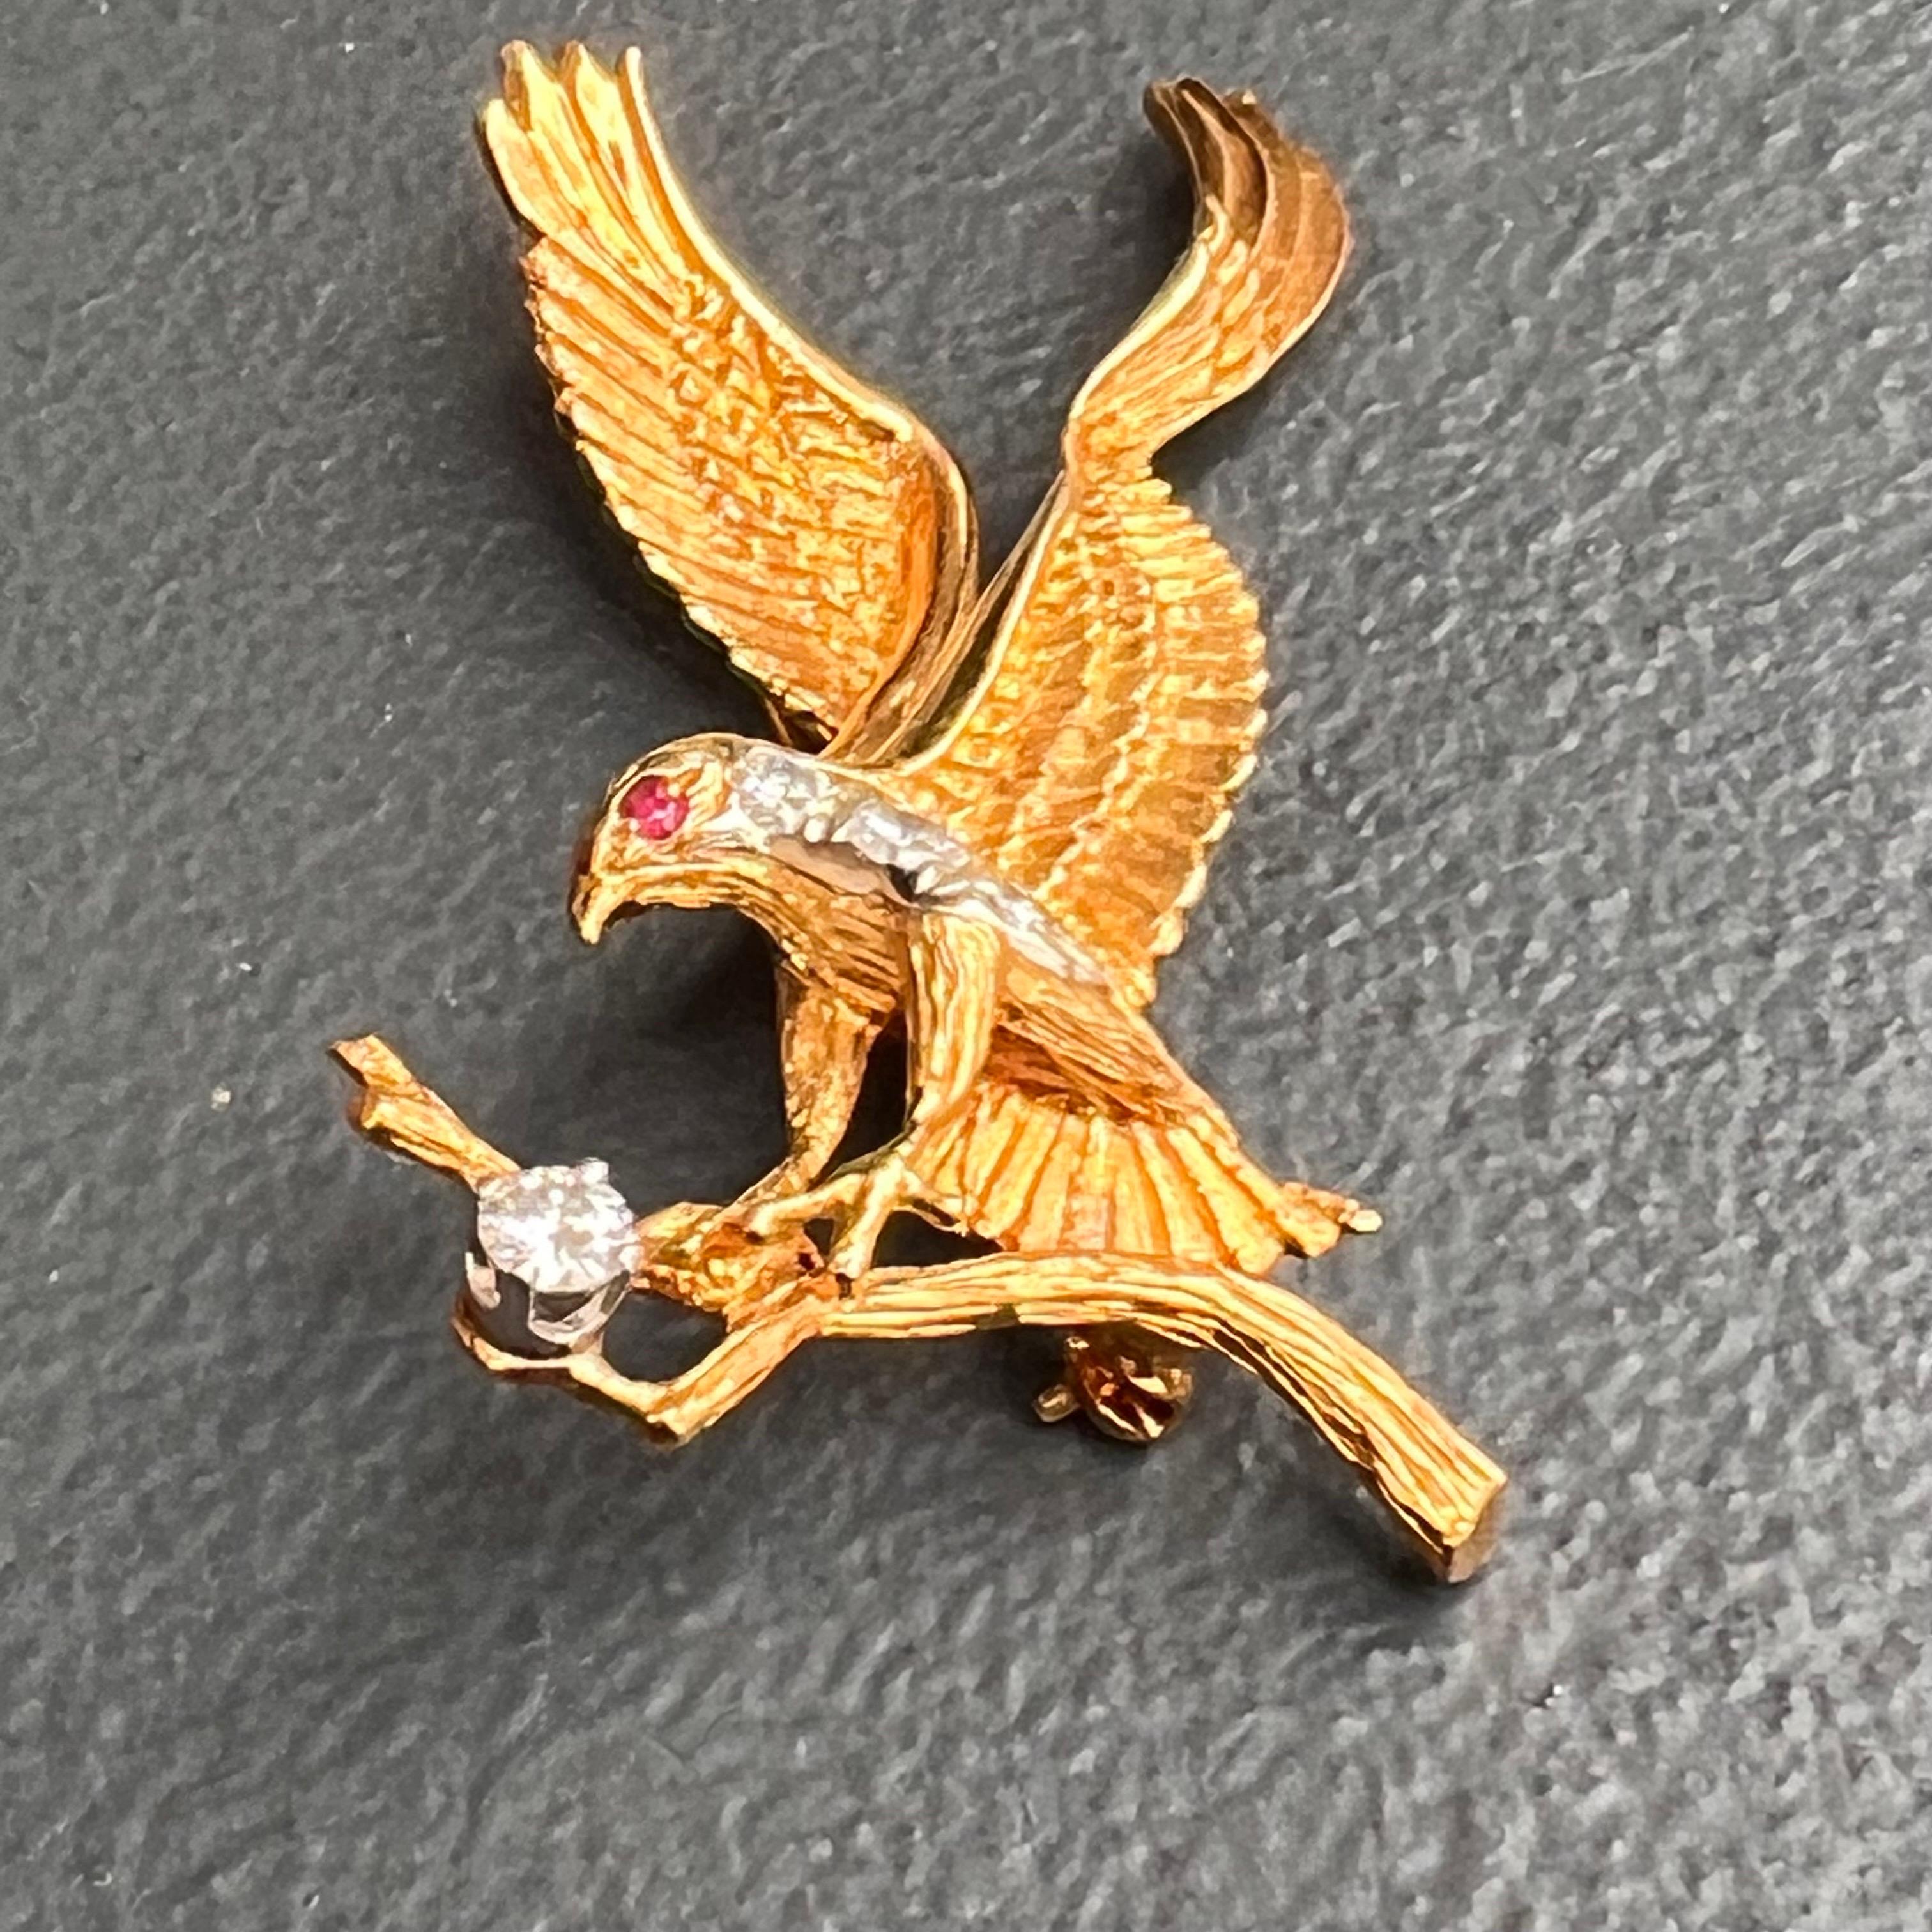 Diamond 18 Karat Gold American Bald Eagle Pin with Ruby Eyes For Sale 1